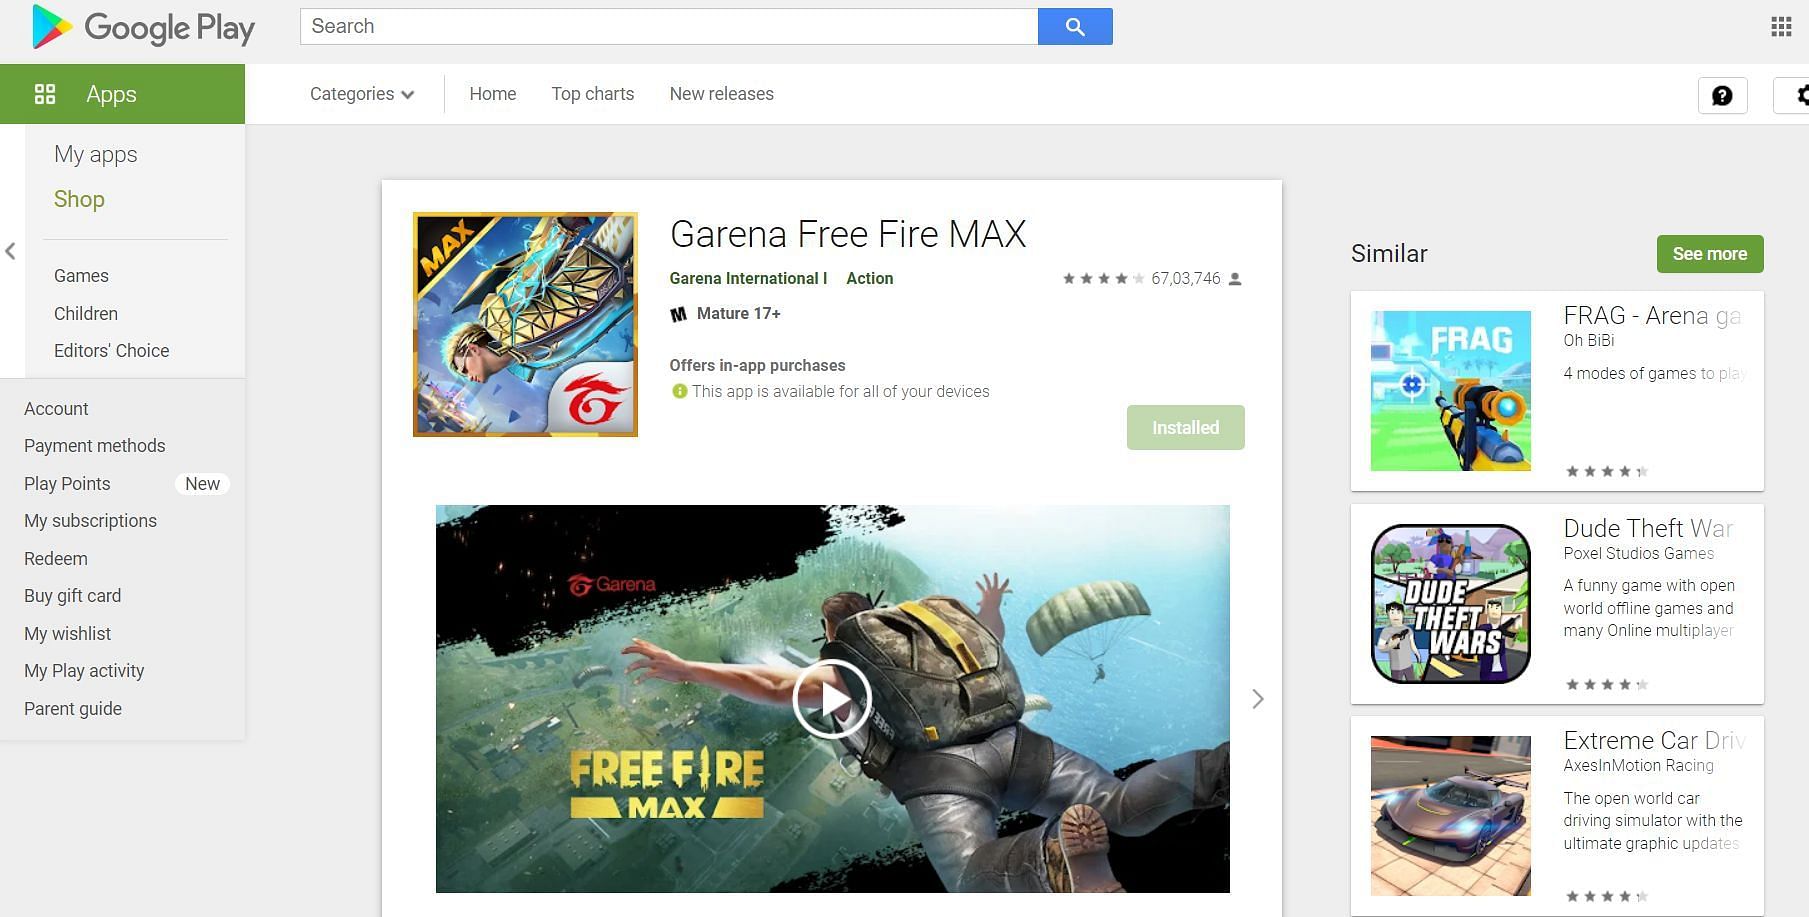 Garena Free Fire in the Play Store (Image via Google Play Store)